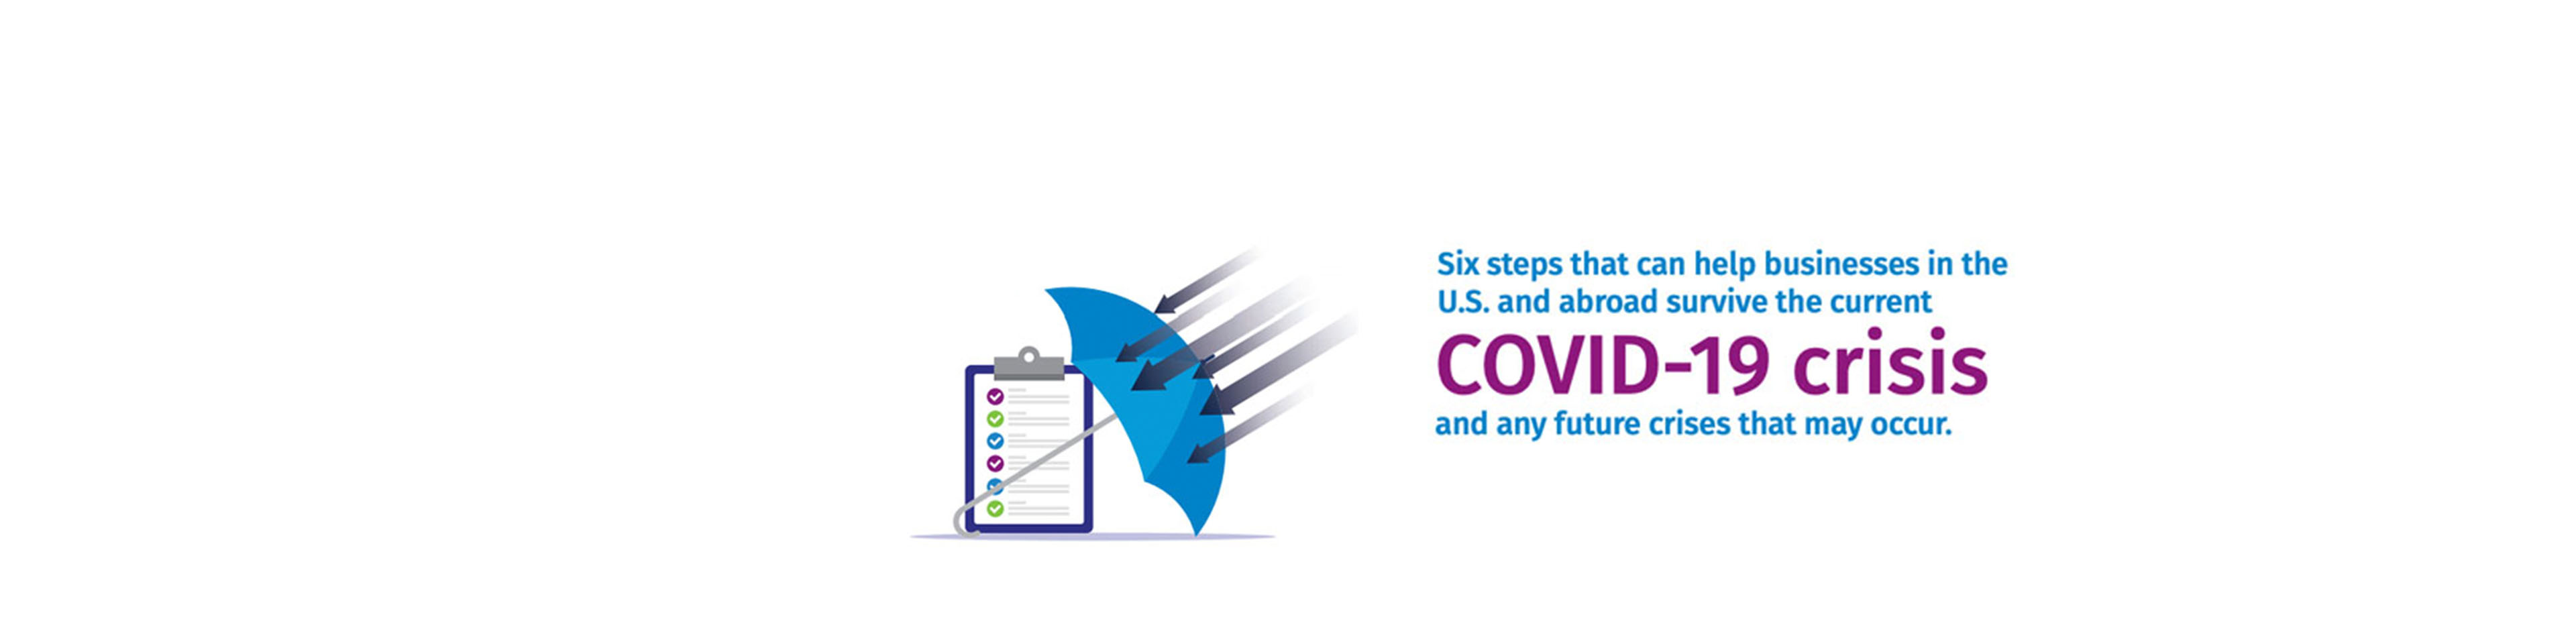 COVID-19 and corporate compliance: Six steps to weather the storm [Infographic]